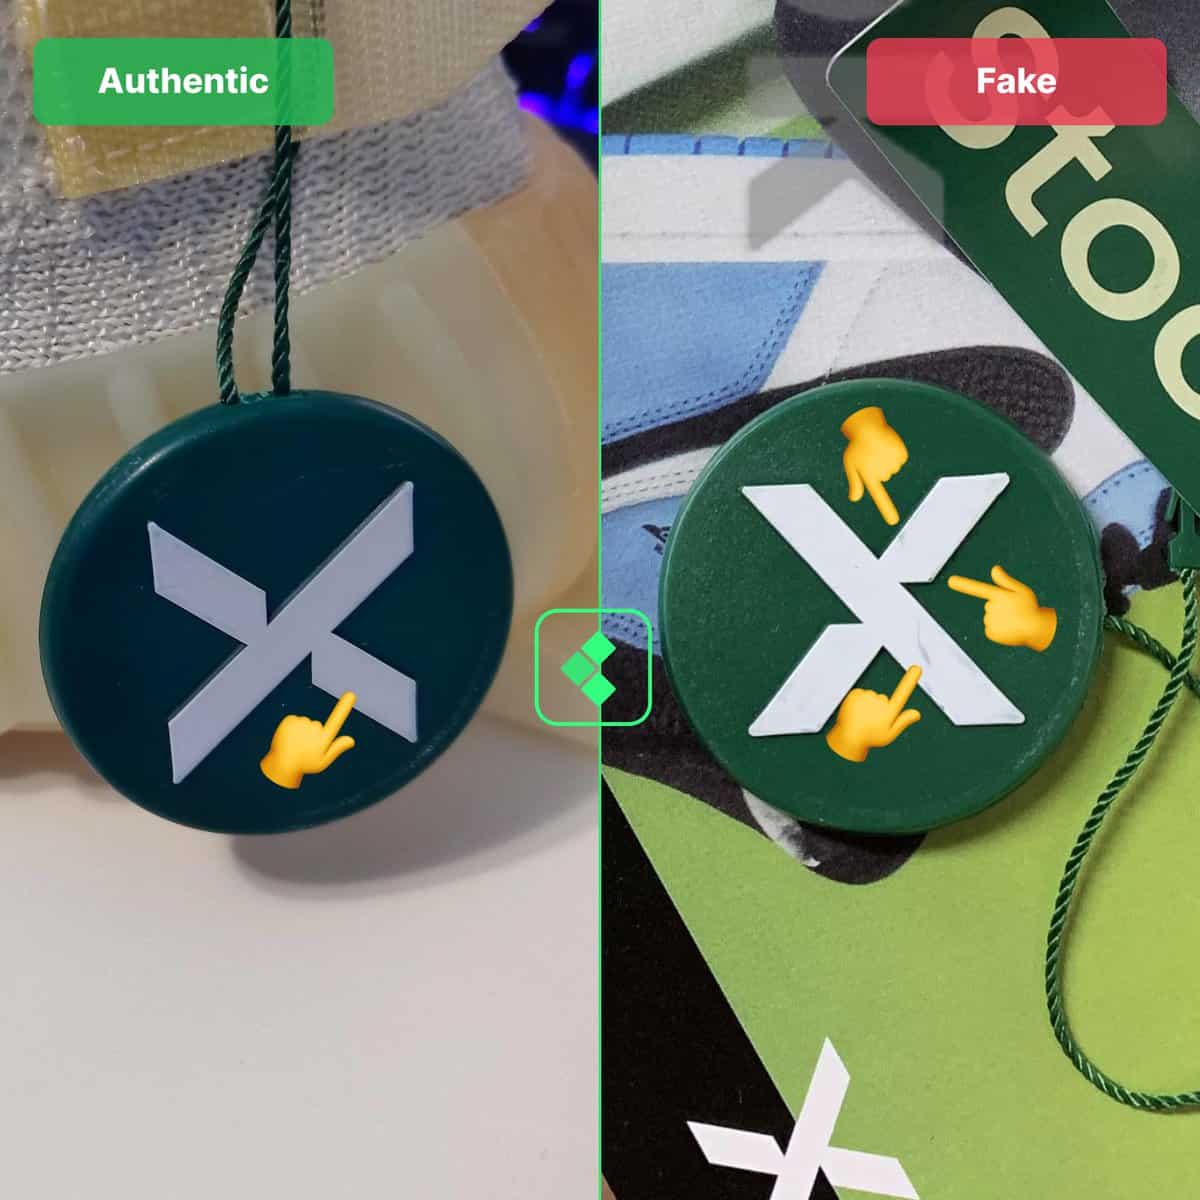 StockX on X: If you find a Golden Authentication Tag on your